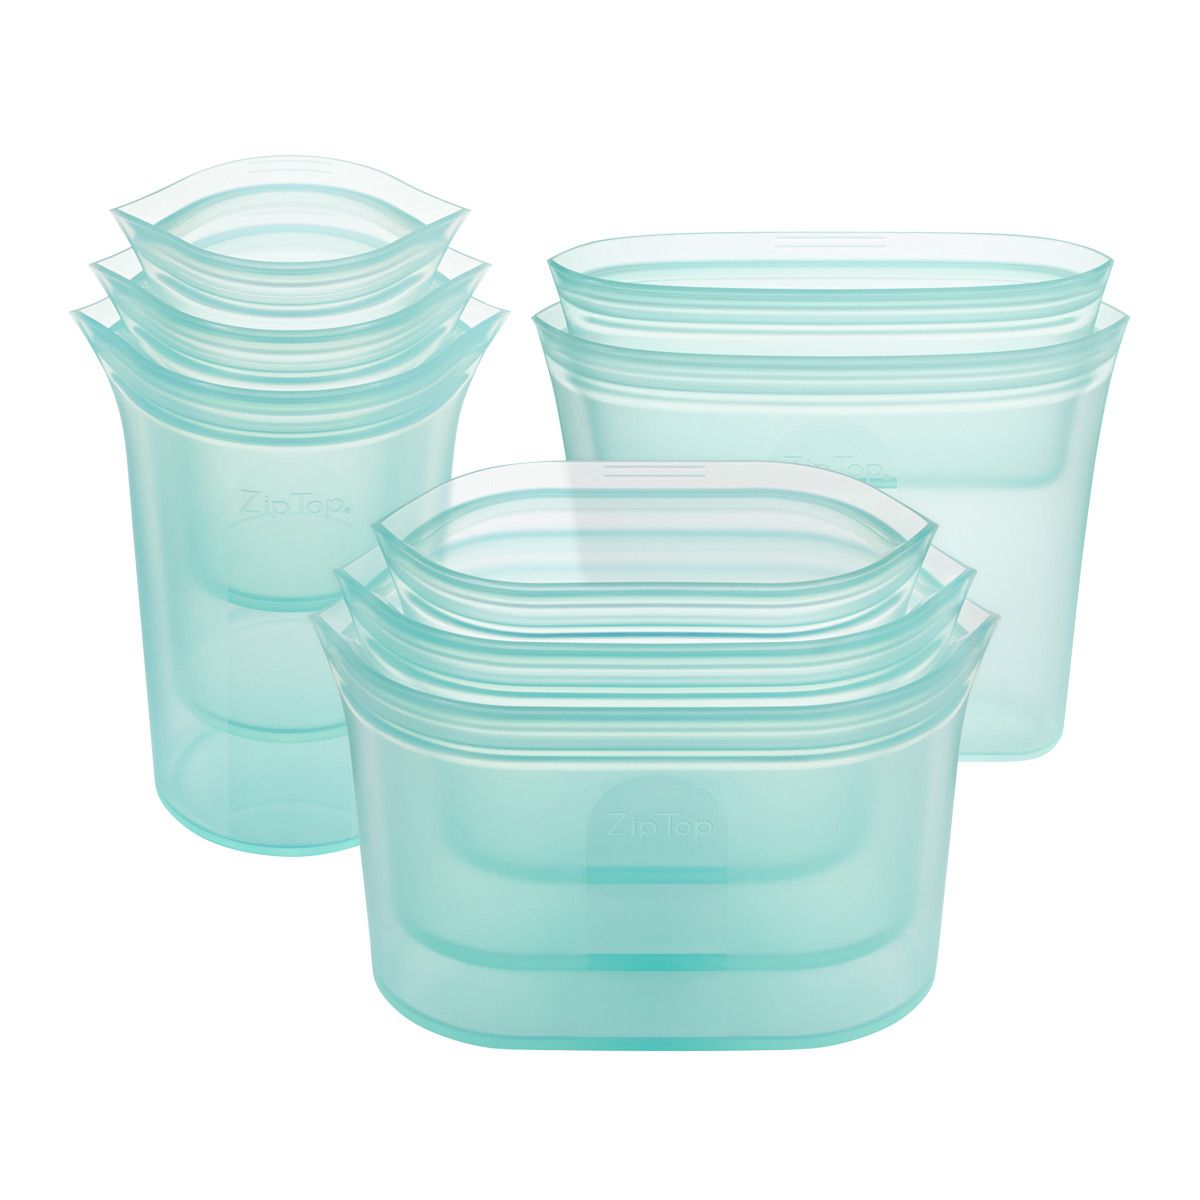 Reusable Silicone Containers | The Container Store